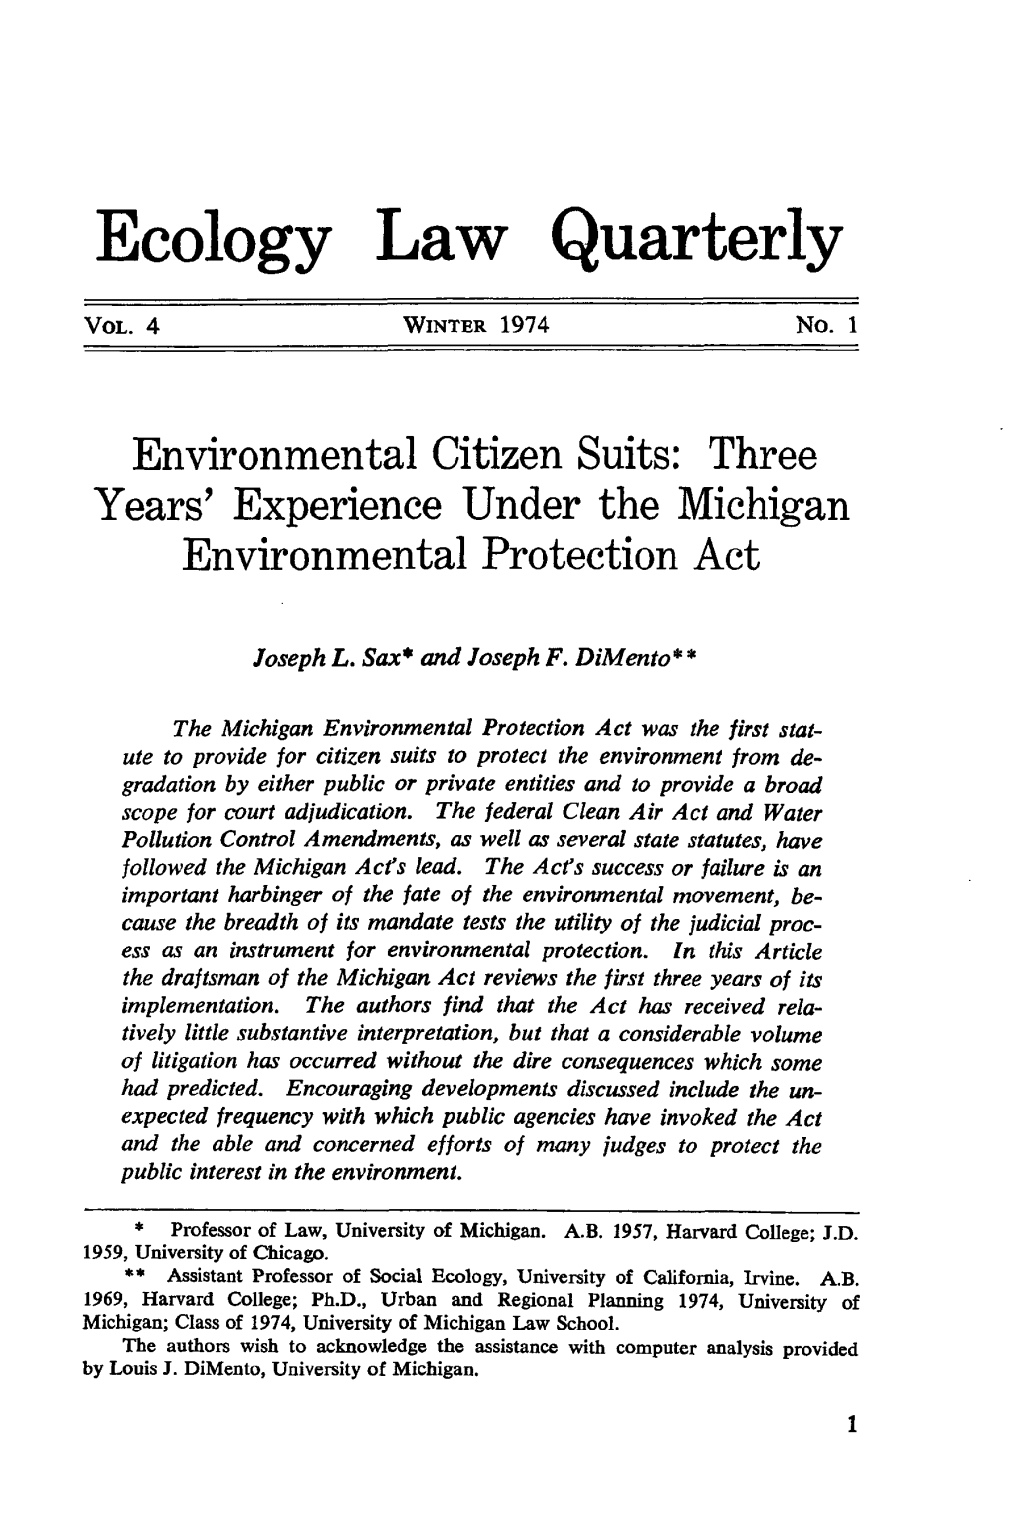 Environmental Citizen Suits: Three Years' Experience Under the Michigan Environmental Protection Act